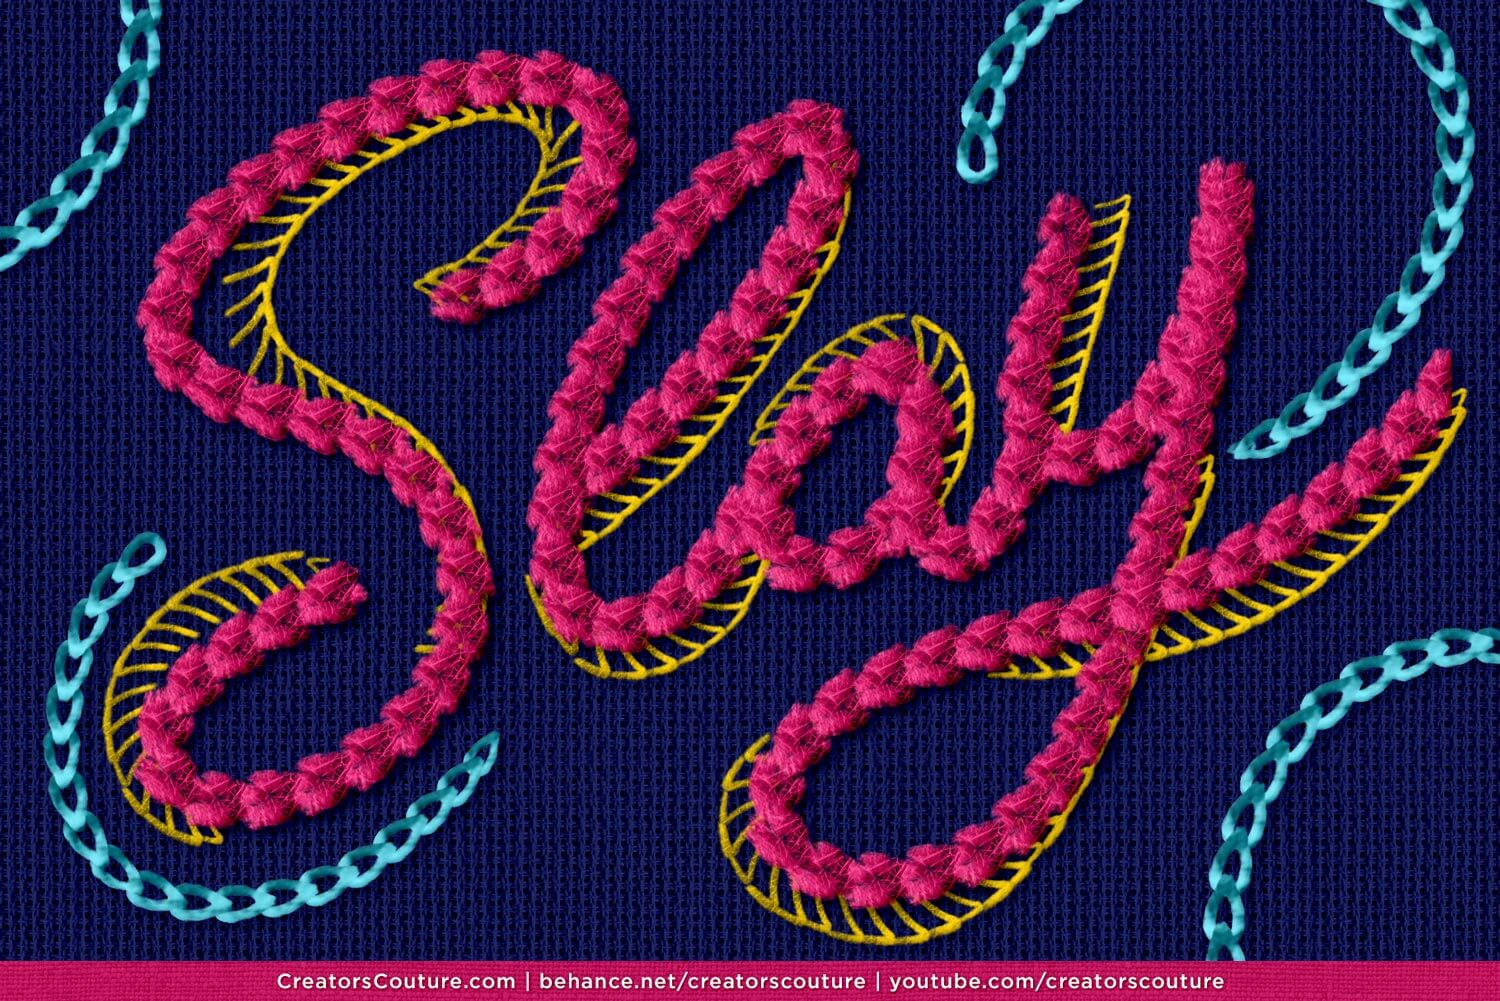 embroidered letter effect created in Photoshop